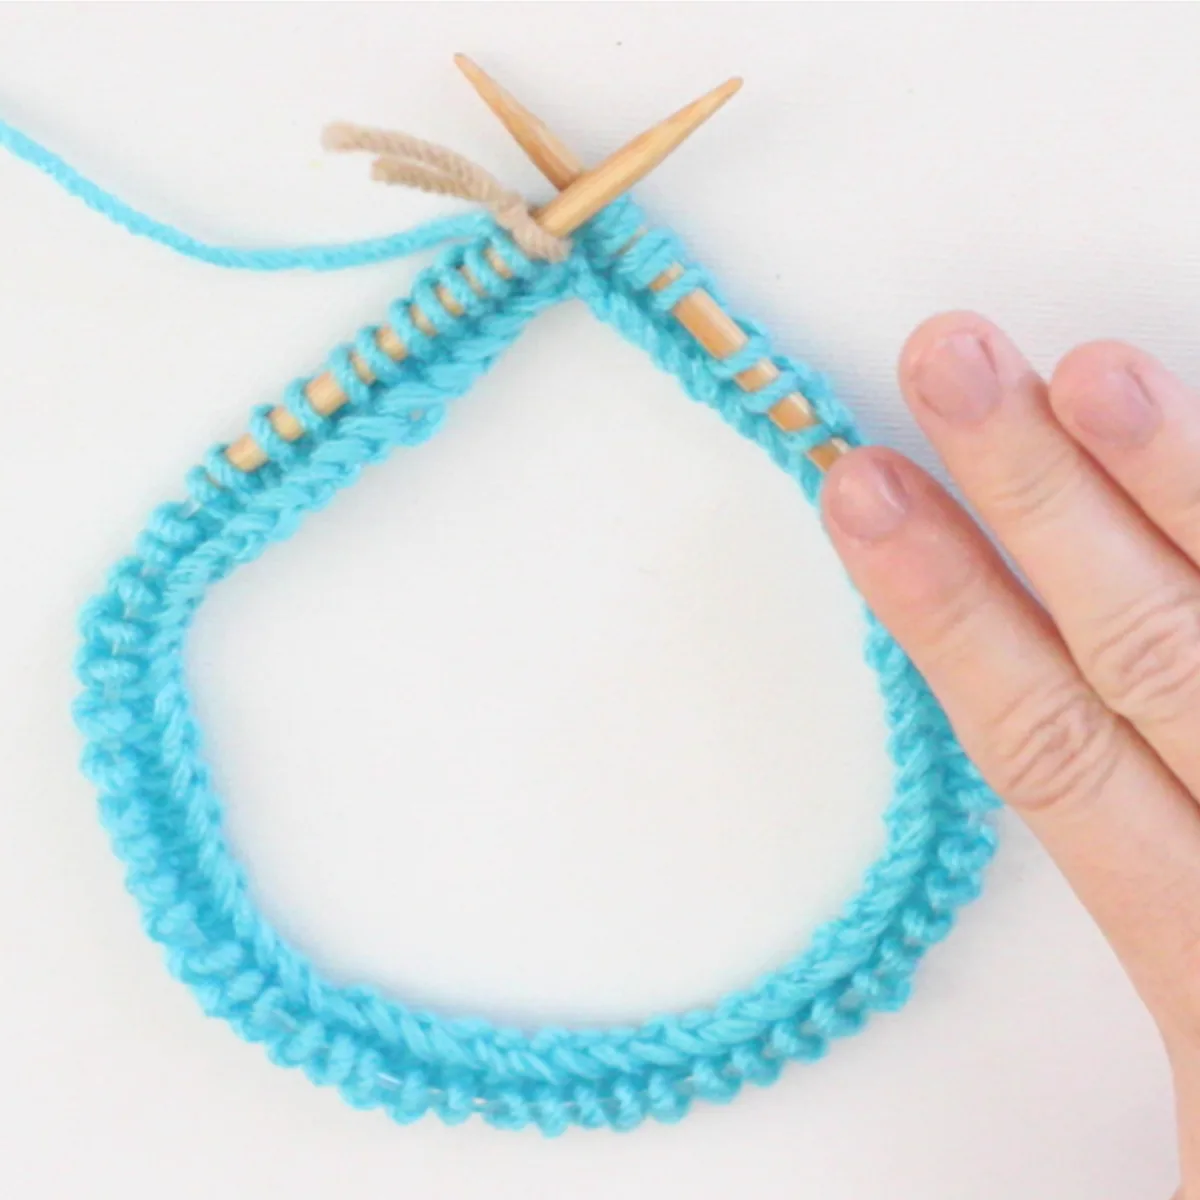 Circular Knitting Needle with blue color yarn cast on and woman's hand